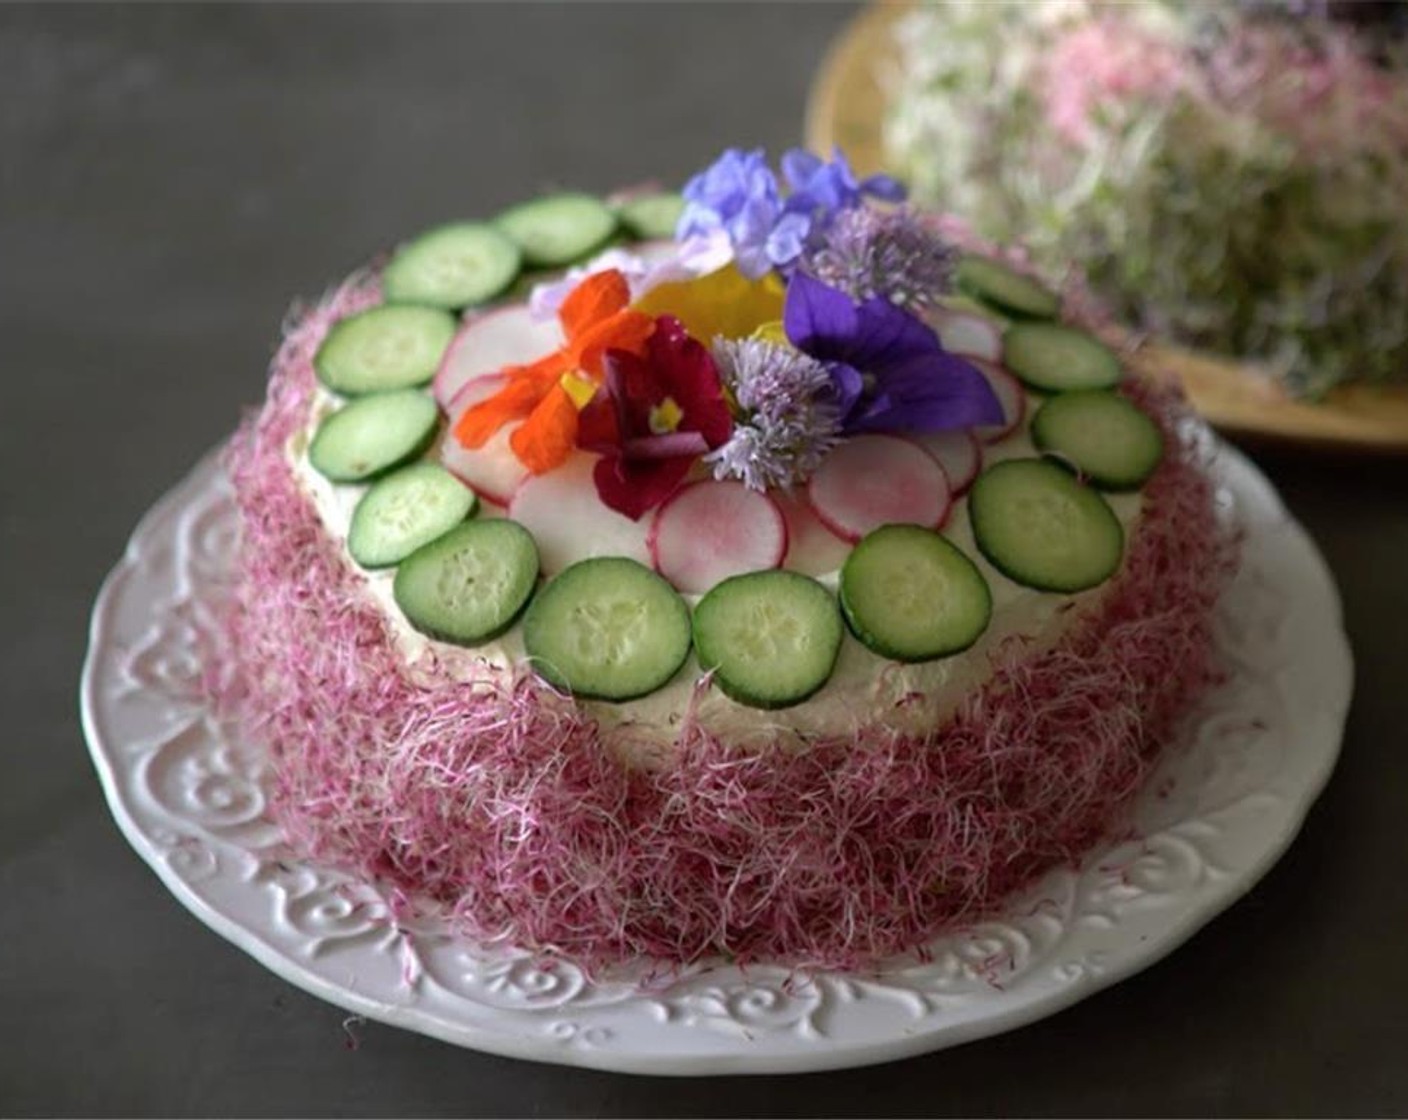 step 10 Add the last layer of the bread onto the cake and press down firmly. Coat the outside of the cake with enough Philadelphia Original Soft Cheese (to taste) to cover the entire cake. Garnish with Cucumbers (to taste), Edible Flowers (to taste) and Multi-Colored Sprouts (to taste). Serve the Egg Salad Cake and enjoy!